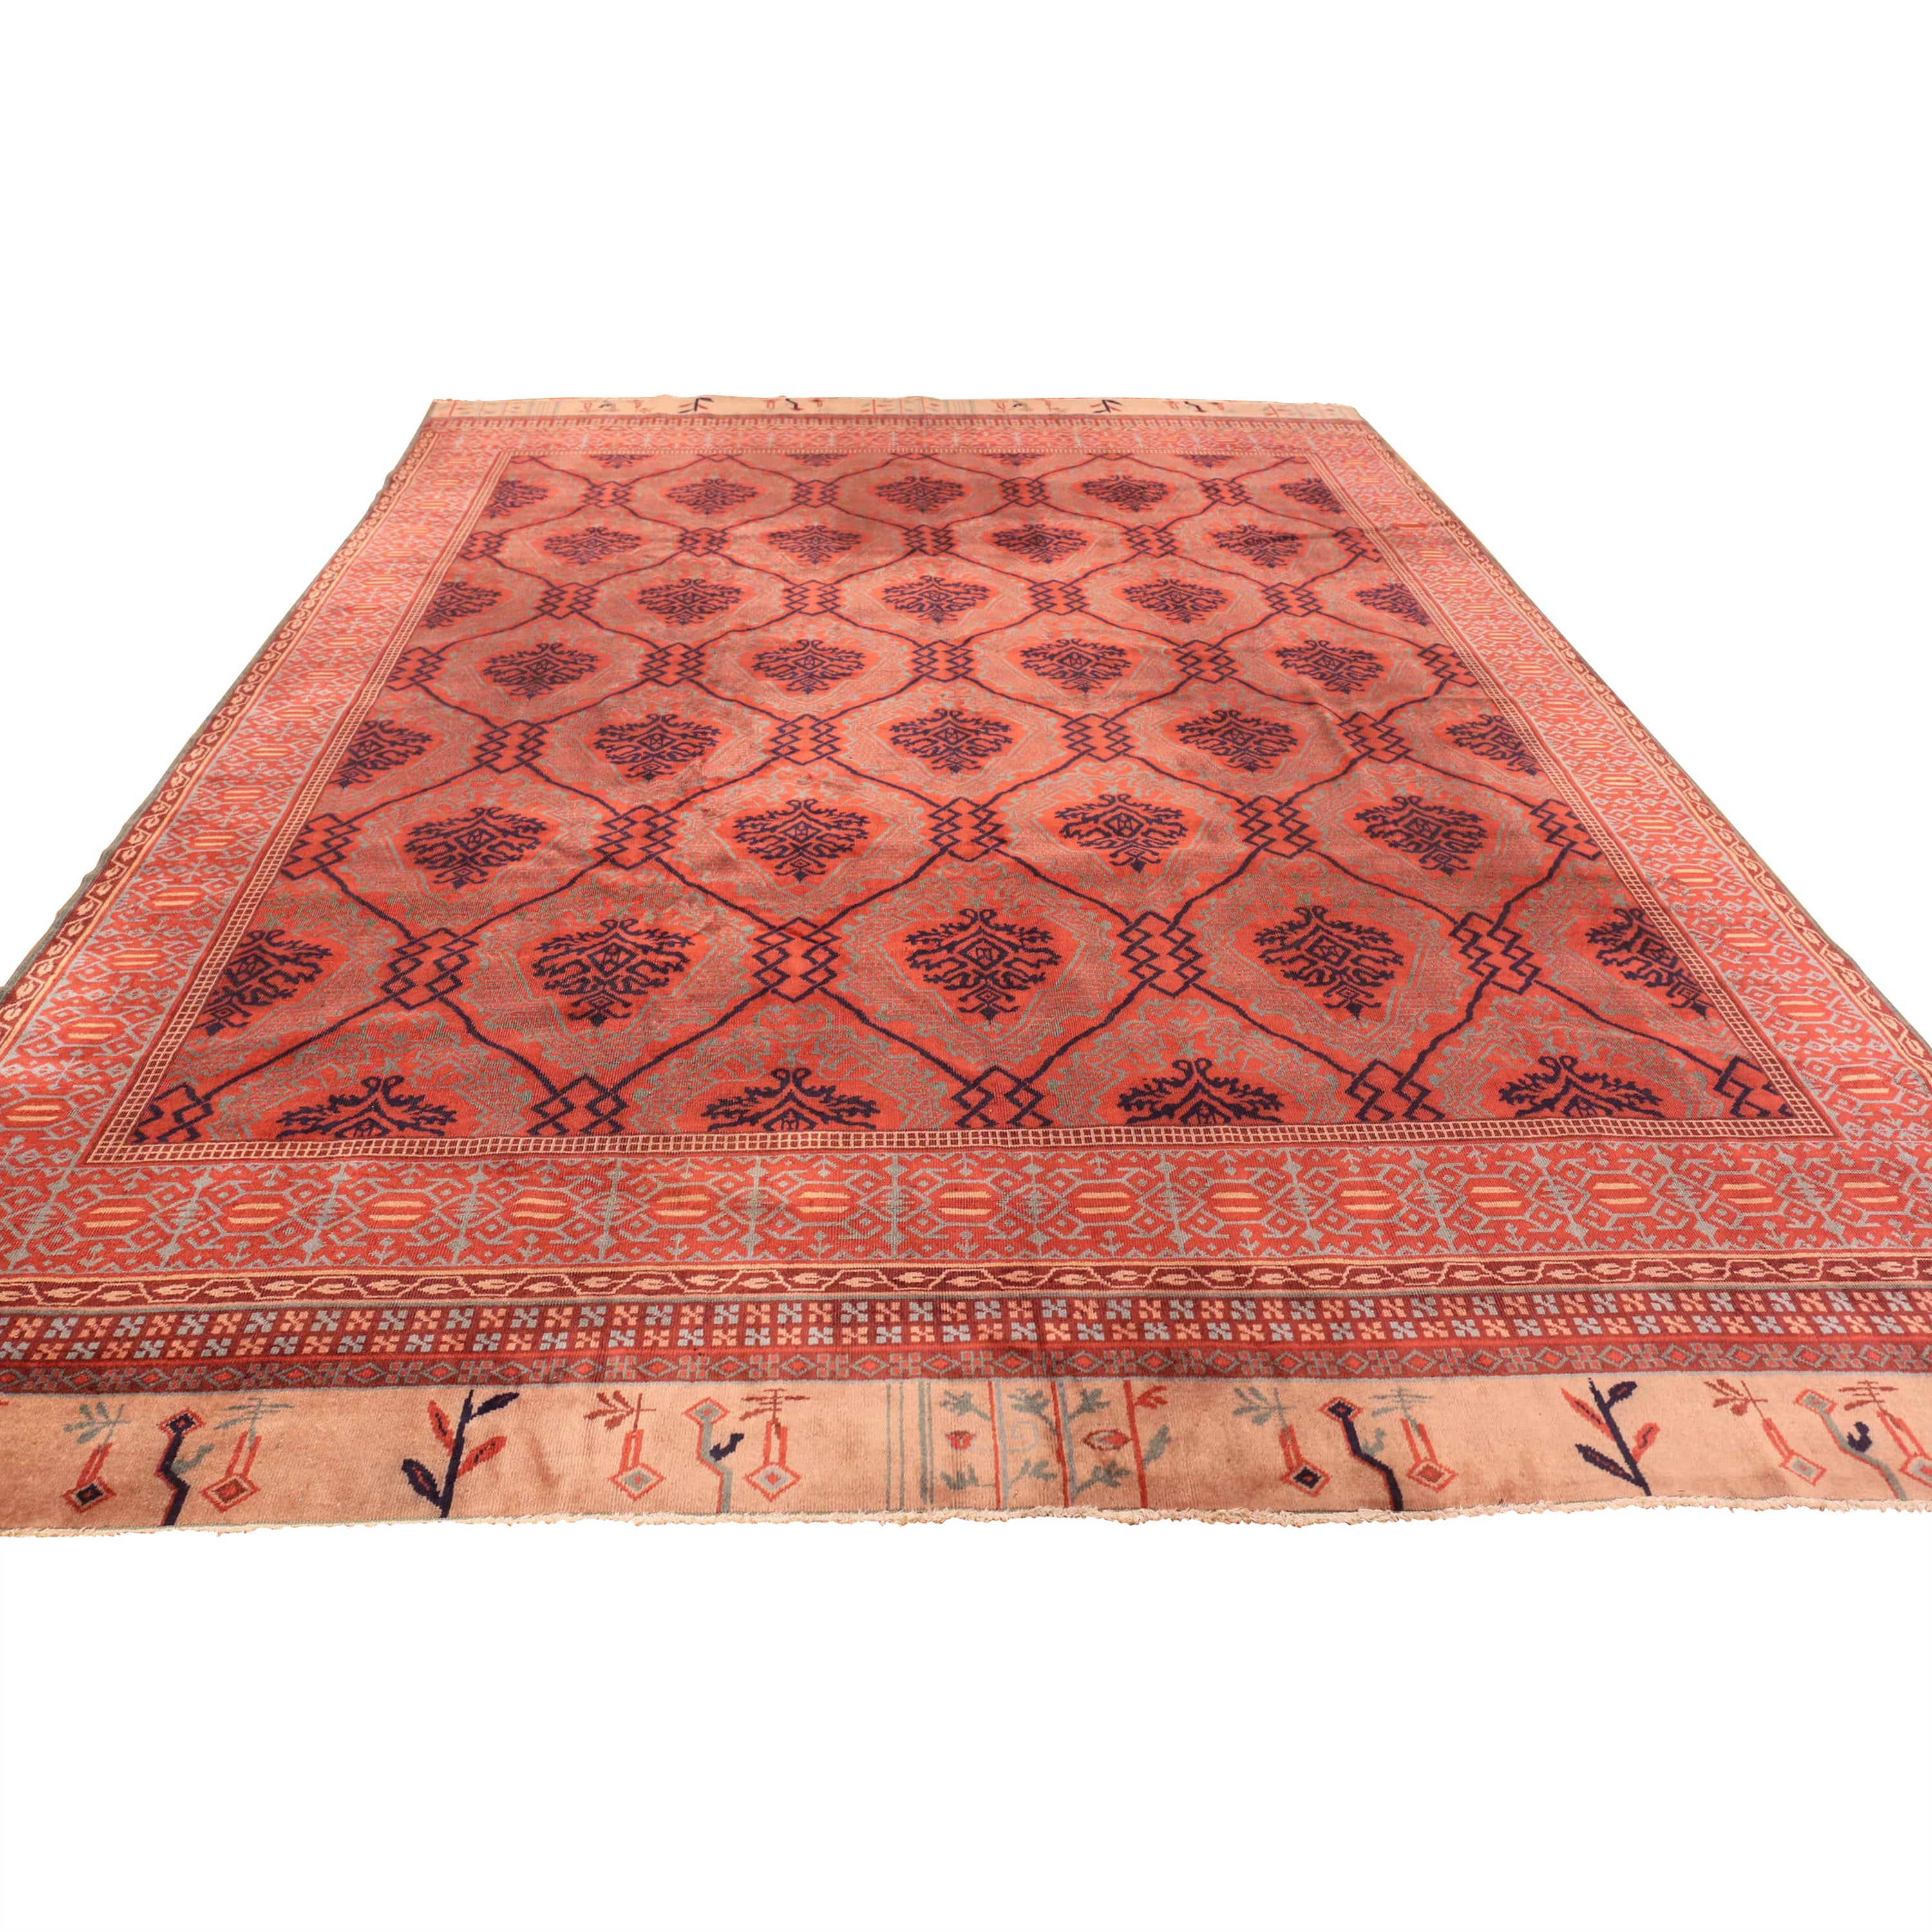 Red Antique Traditional Turkish Smnyrna Rug - 10'5" x 13'9"